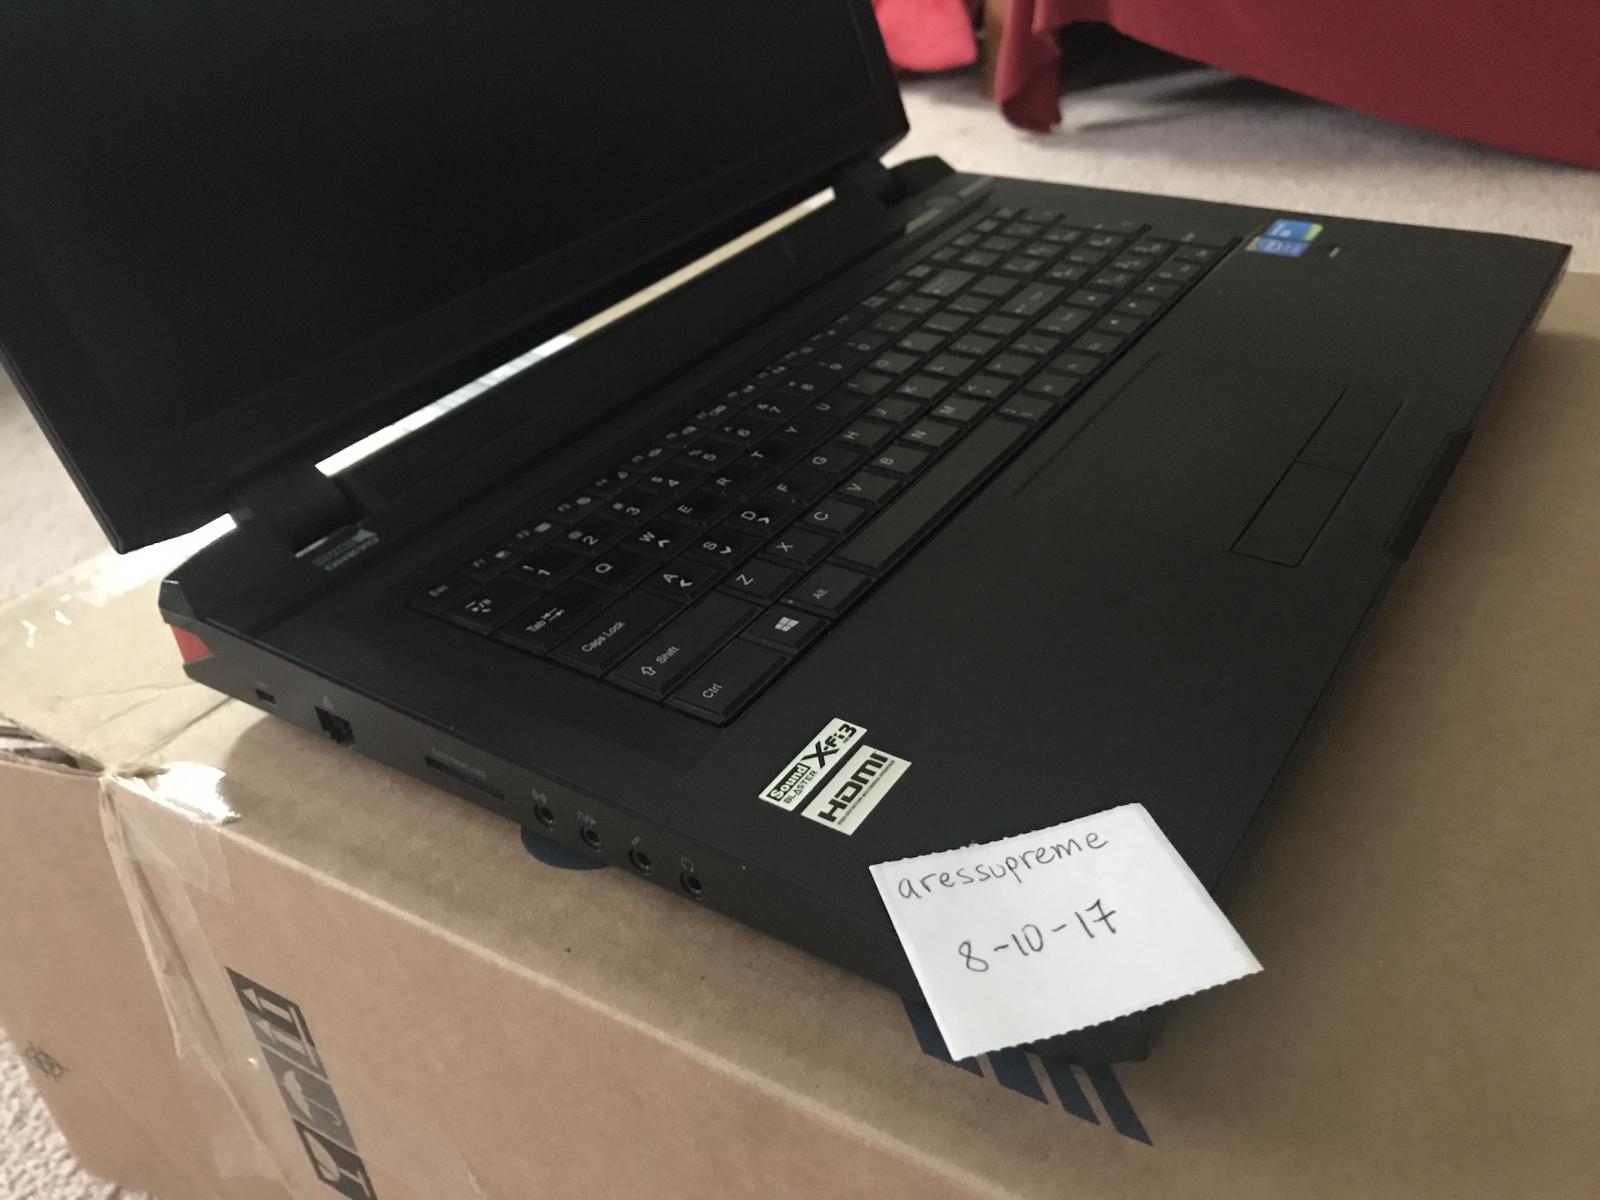 For sale Sager NP9377 / Clevo P377SM-A High-End Gaming Laptop